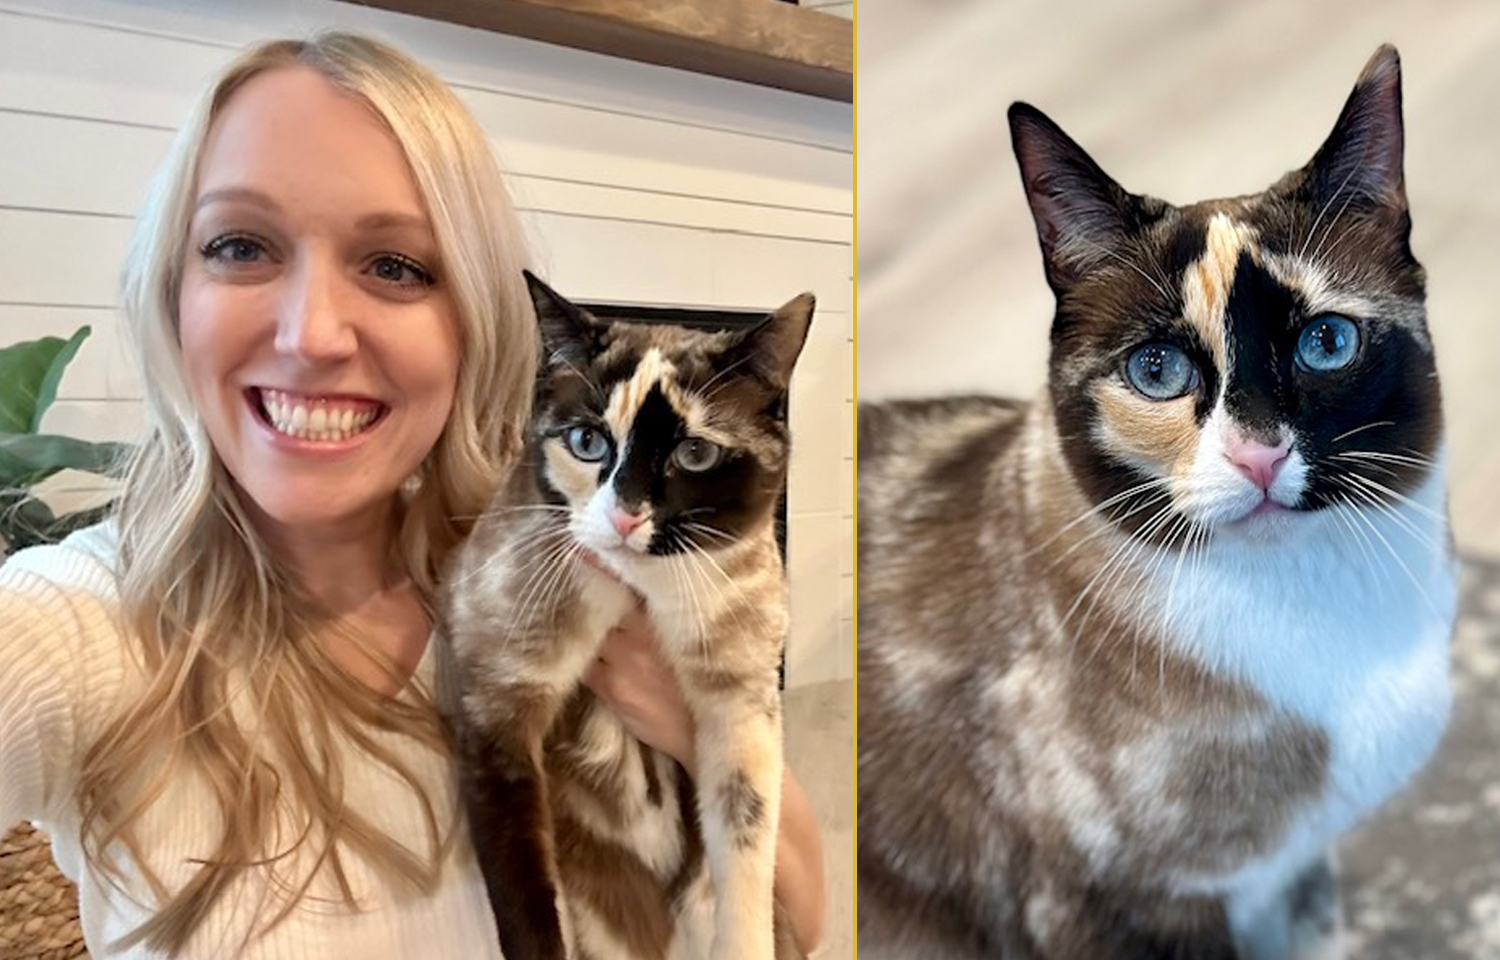 Side by side of a woman holding a cat and a closeup of the cat.